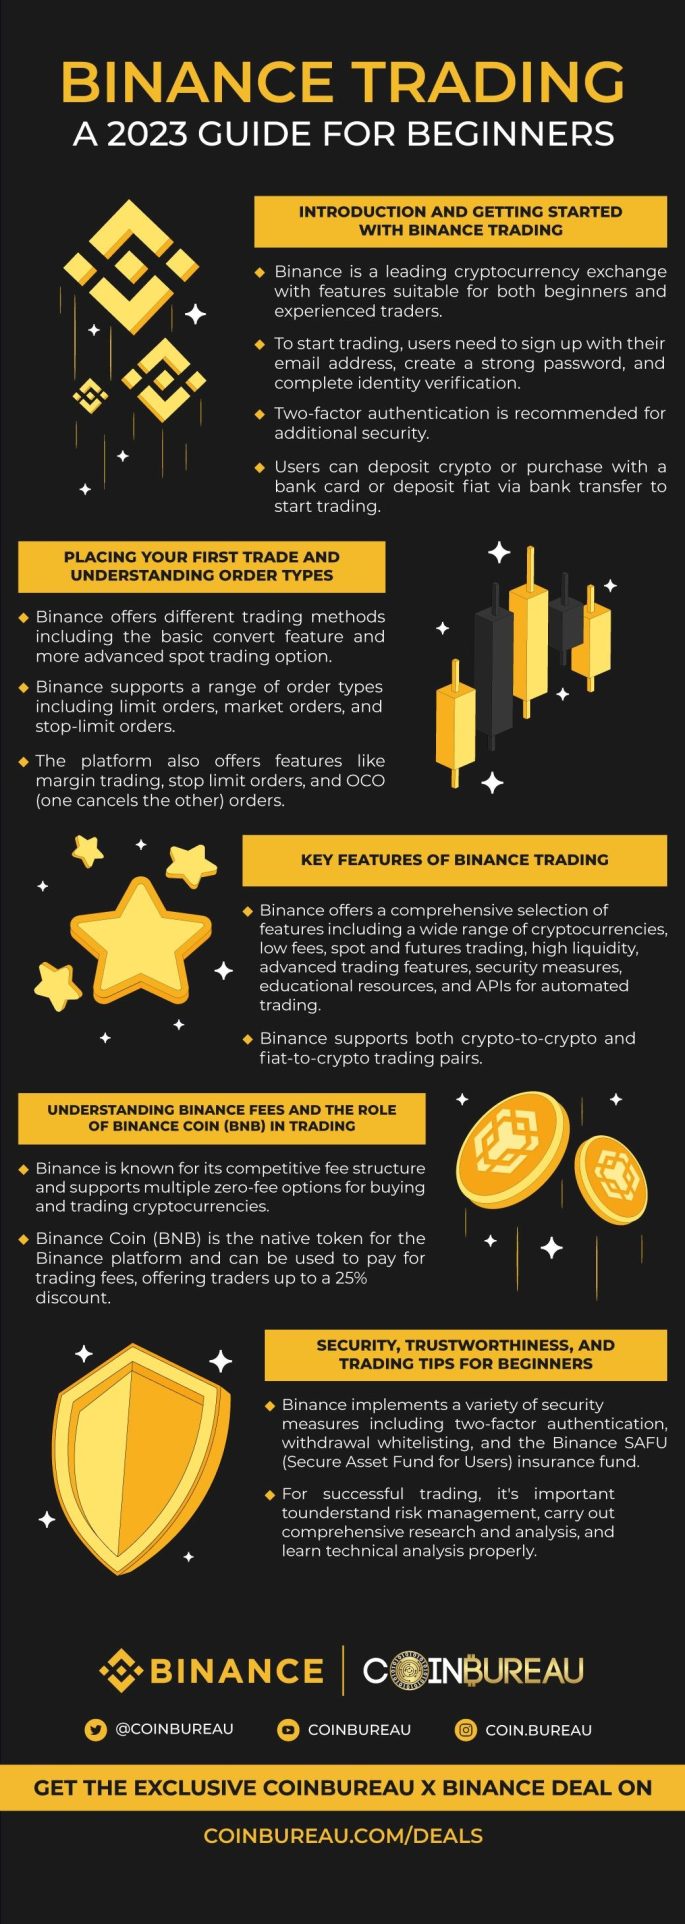 Binance Trading – A 2023 Guide For Beginners